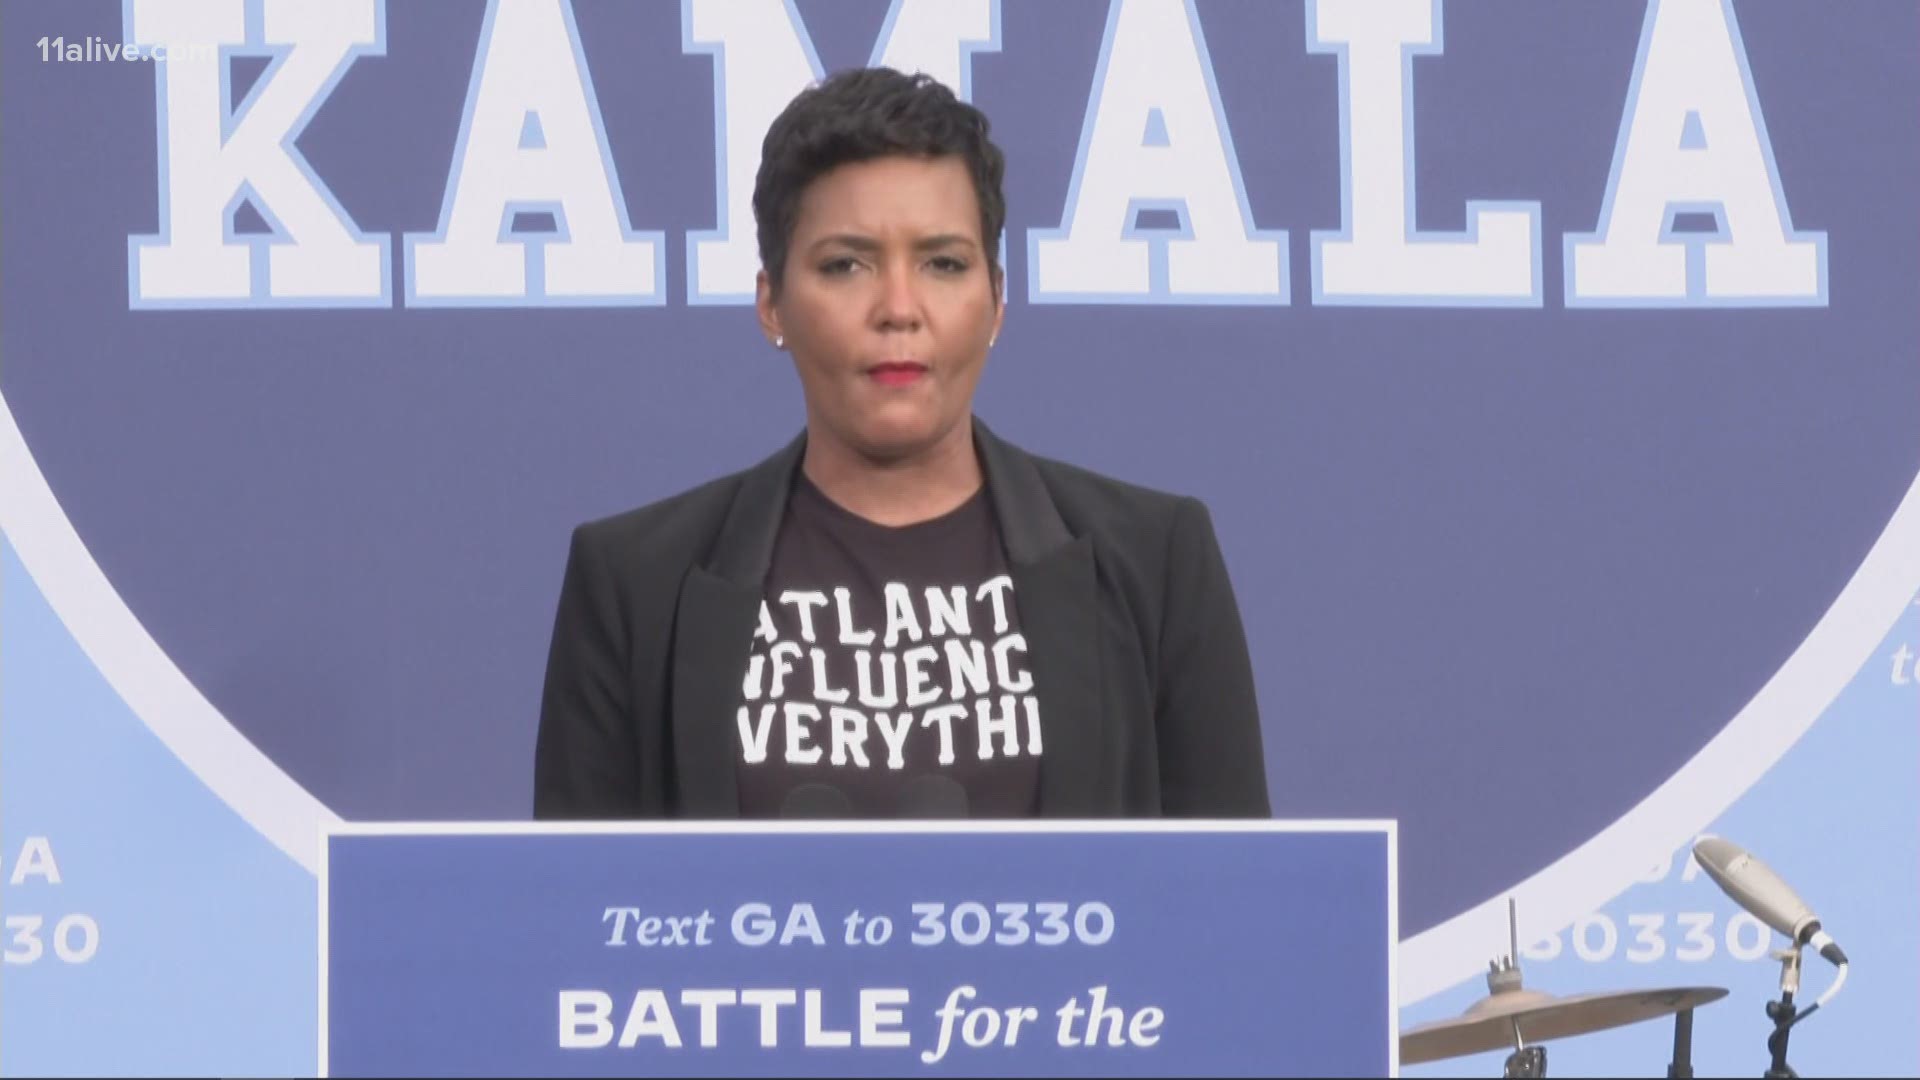 Atlanta Mayor Keisha Lance Bottoms made the comments at a drive-in event held in support of Joe Biden on Tuesday.